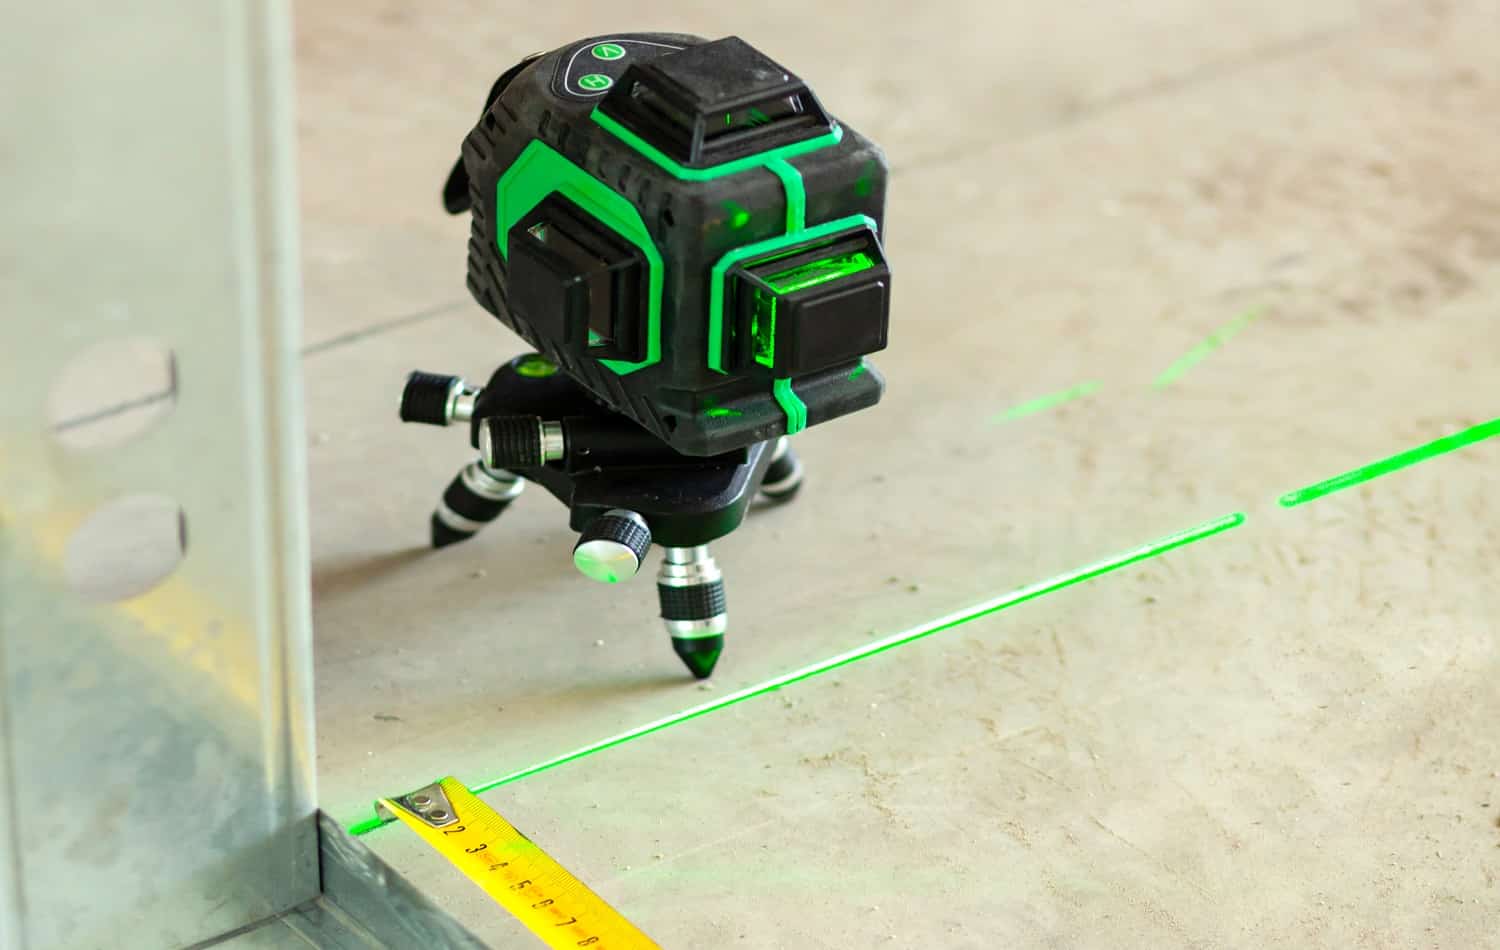 Laser level measuring tool for the installation of an aluminum structure for fixing plasterboard panels.